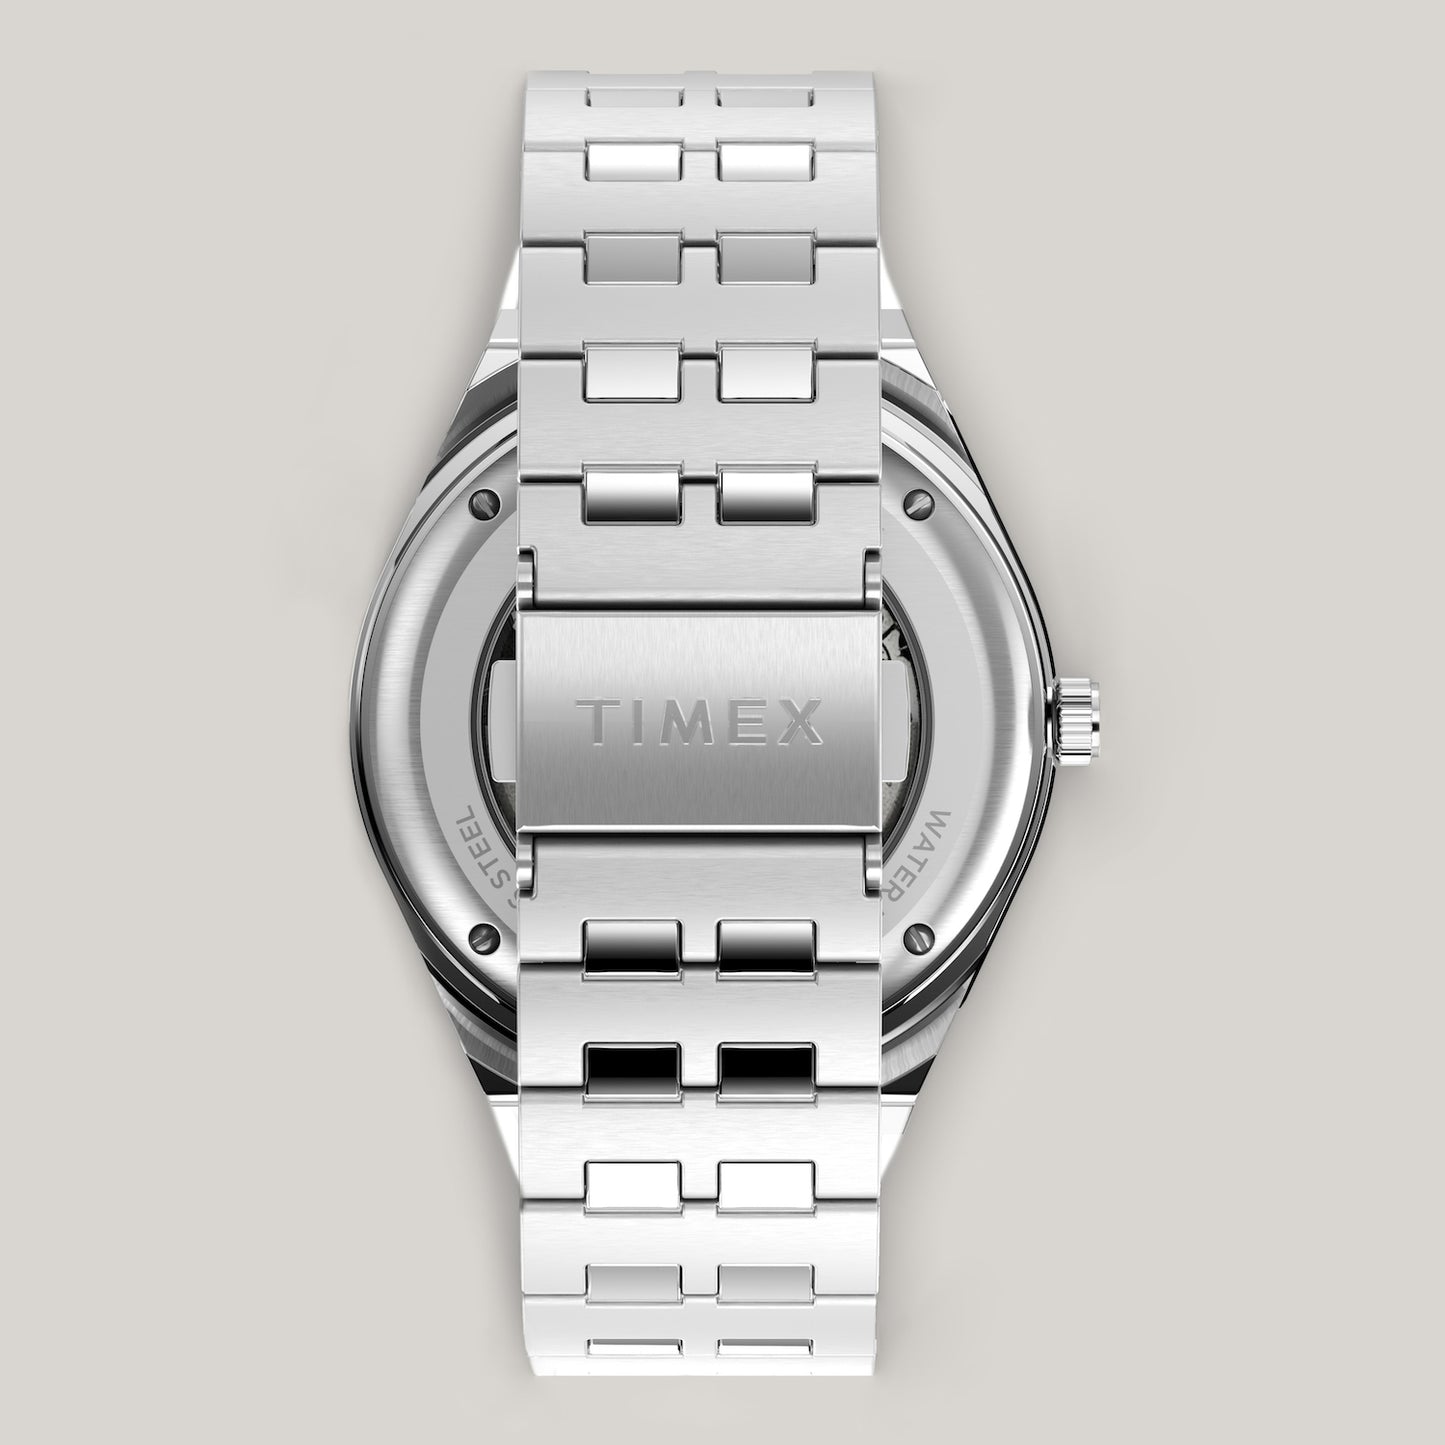 TIMEX M79 AUTOMATIC 40MM STAINLESS STEEL BRACELET WATCH  - SILVER